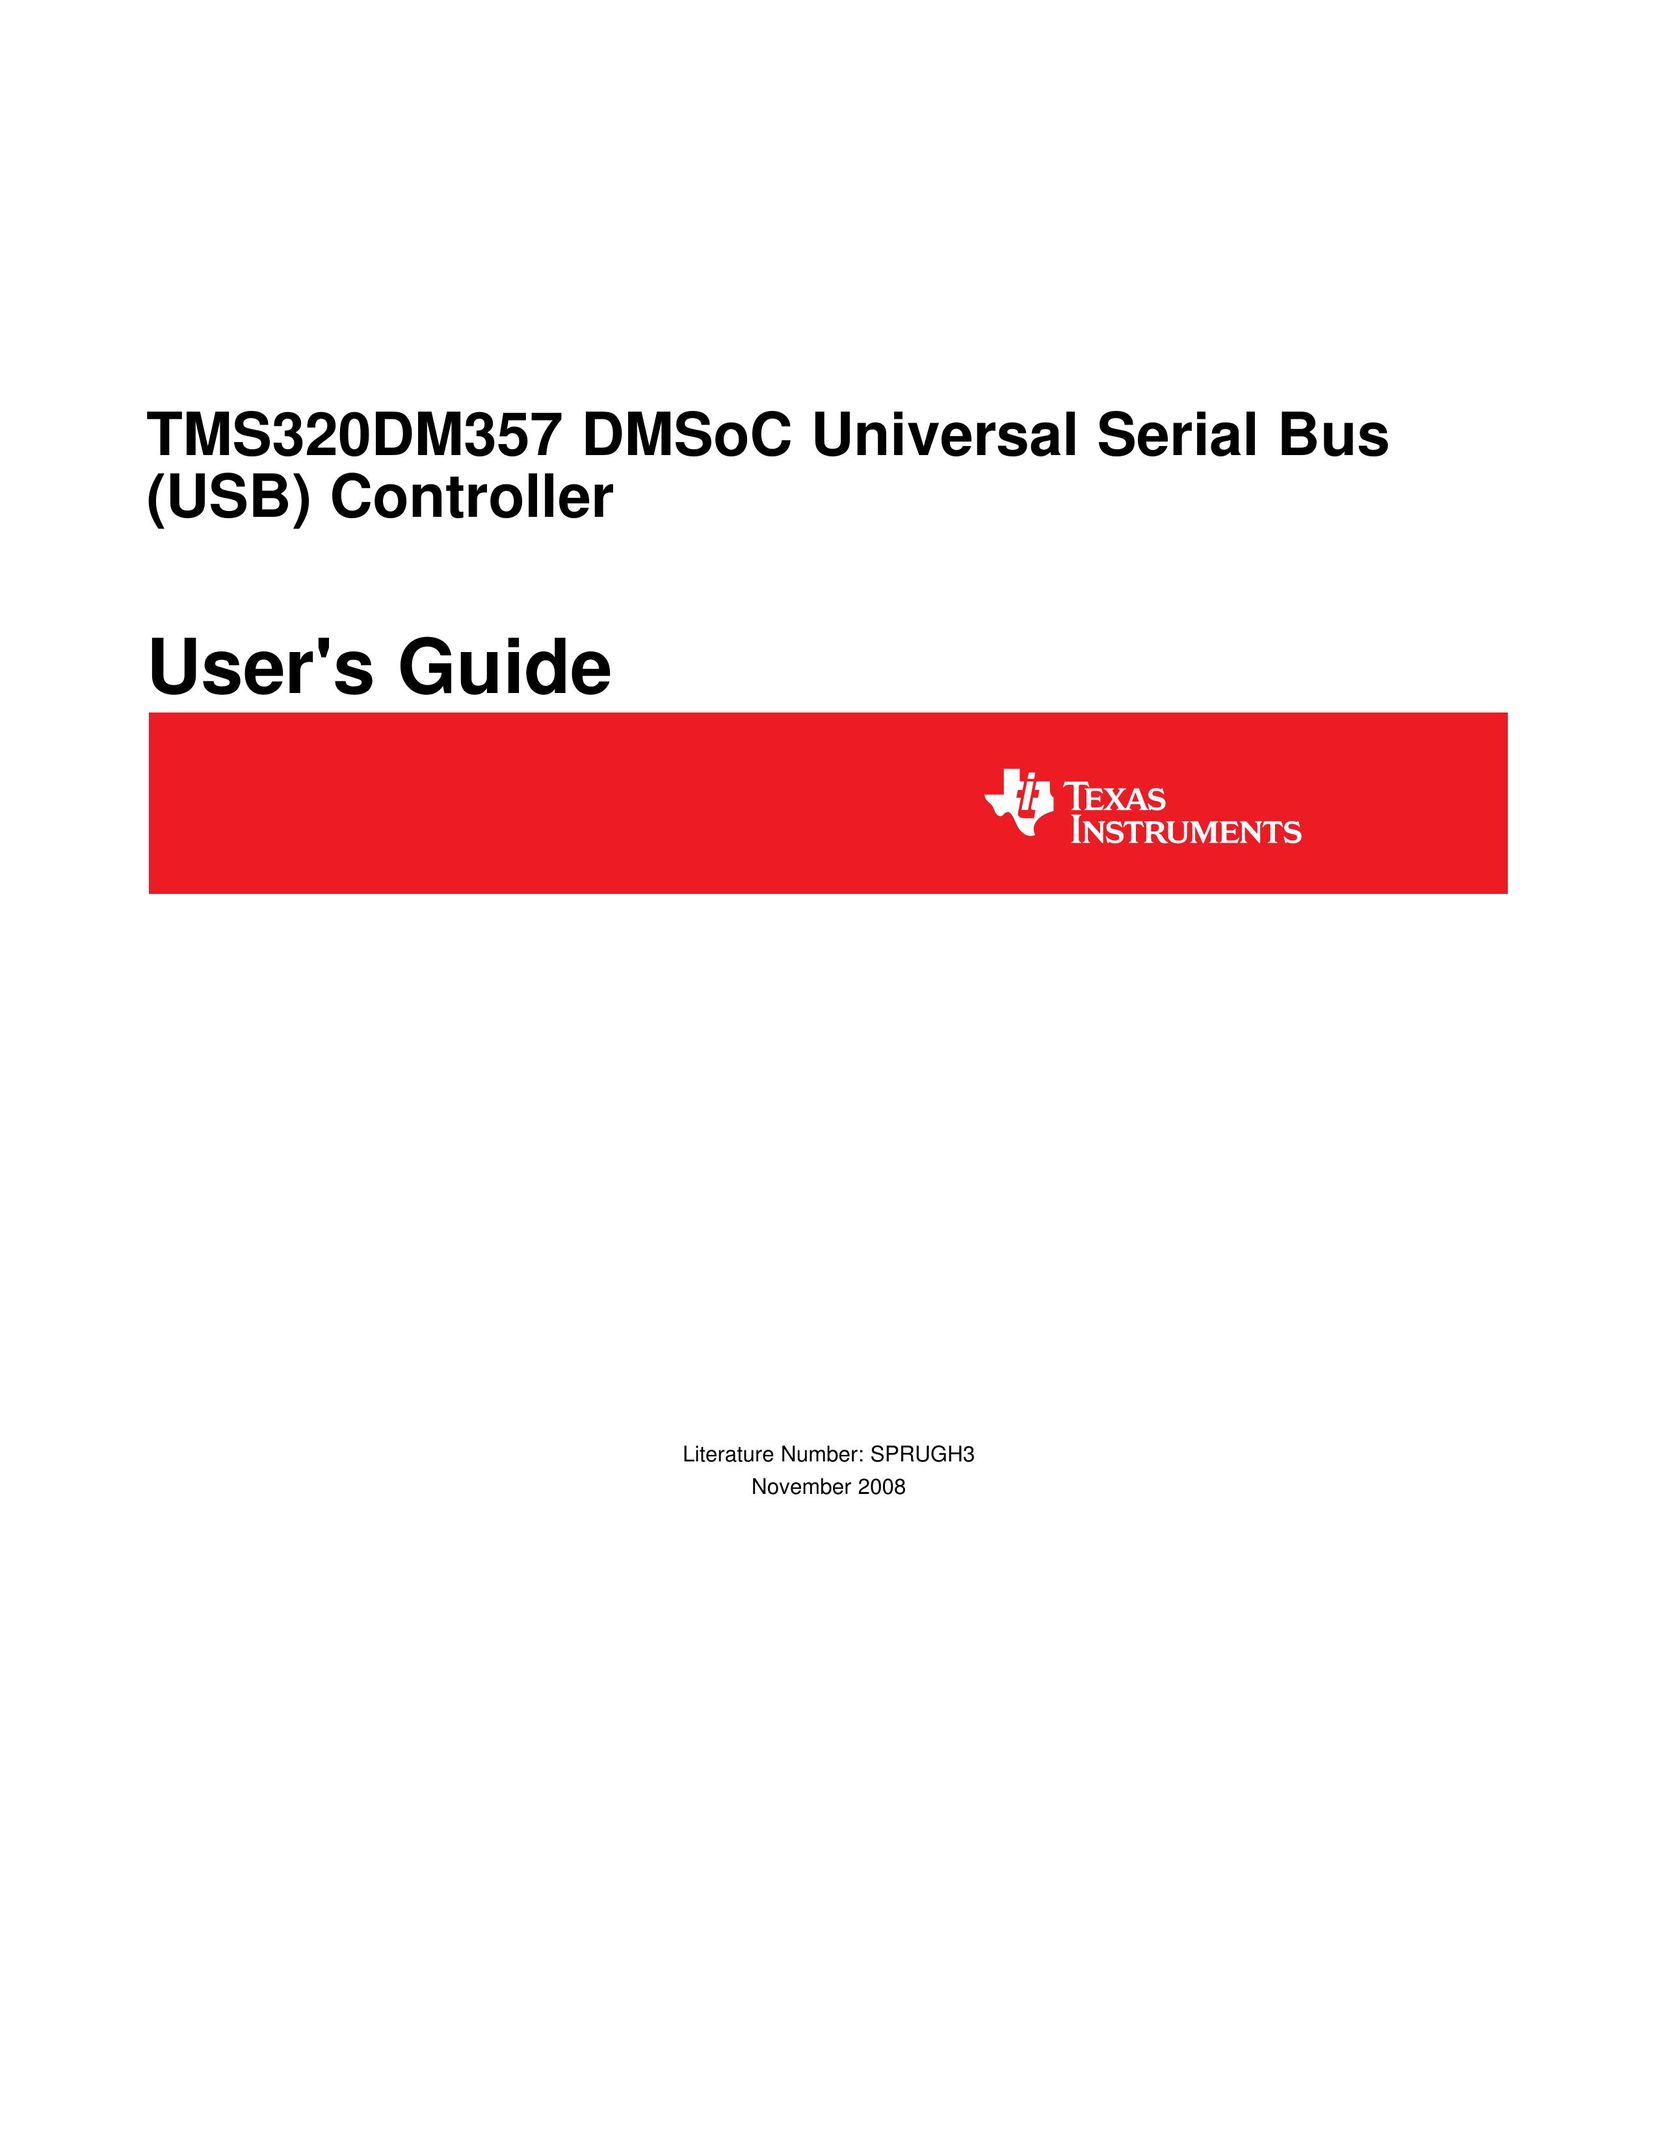 Texas Instruments TMS320DM357 Switch User Manual